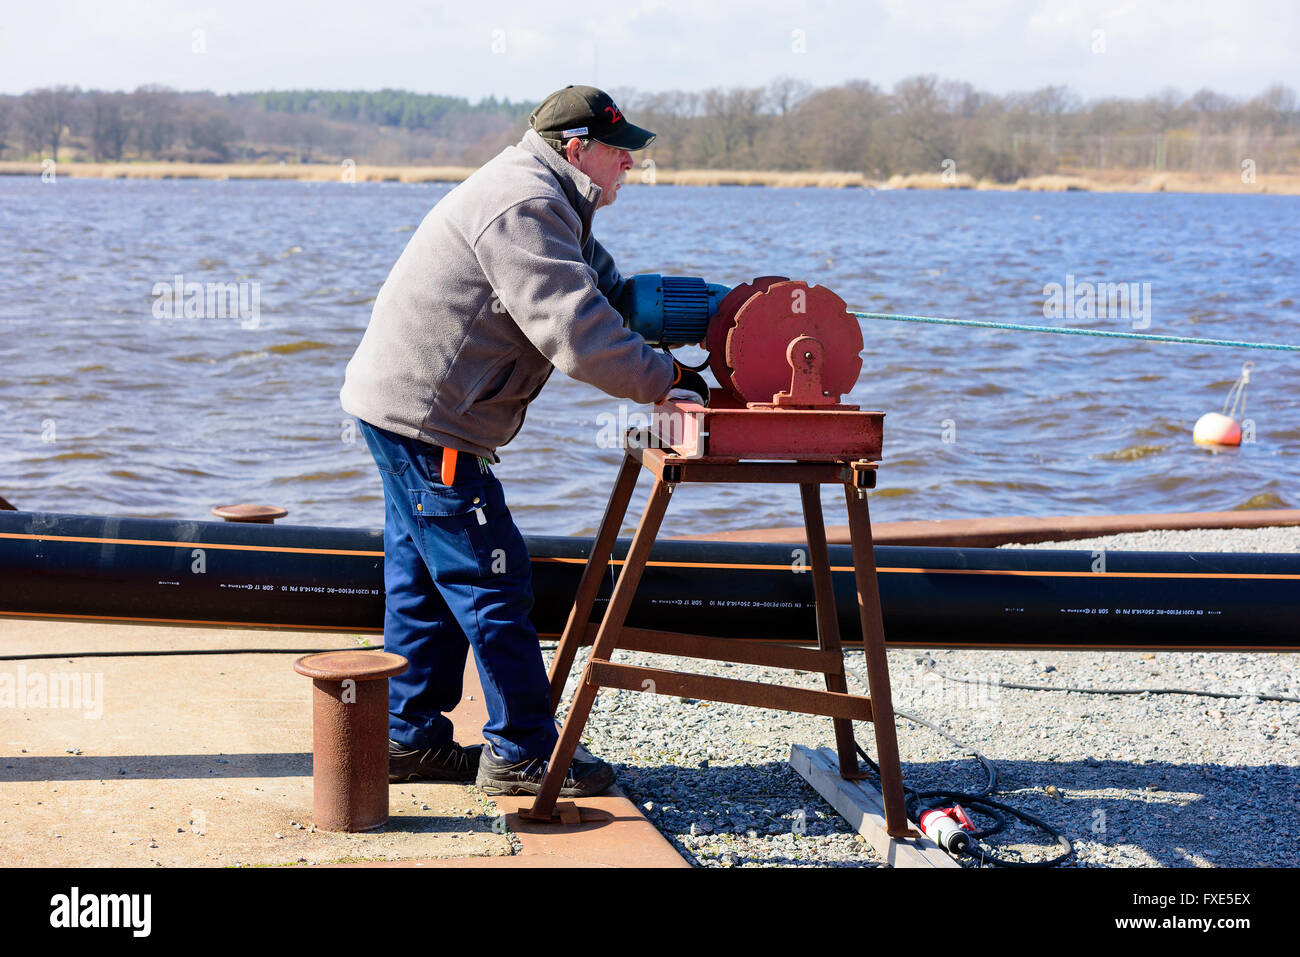 Karlskrona, Sweden - April 7, 2016: Assembly of underwater sewage pipeline in public area. Here a man is using a motorized winch Stock Photo